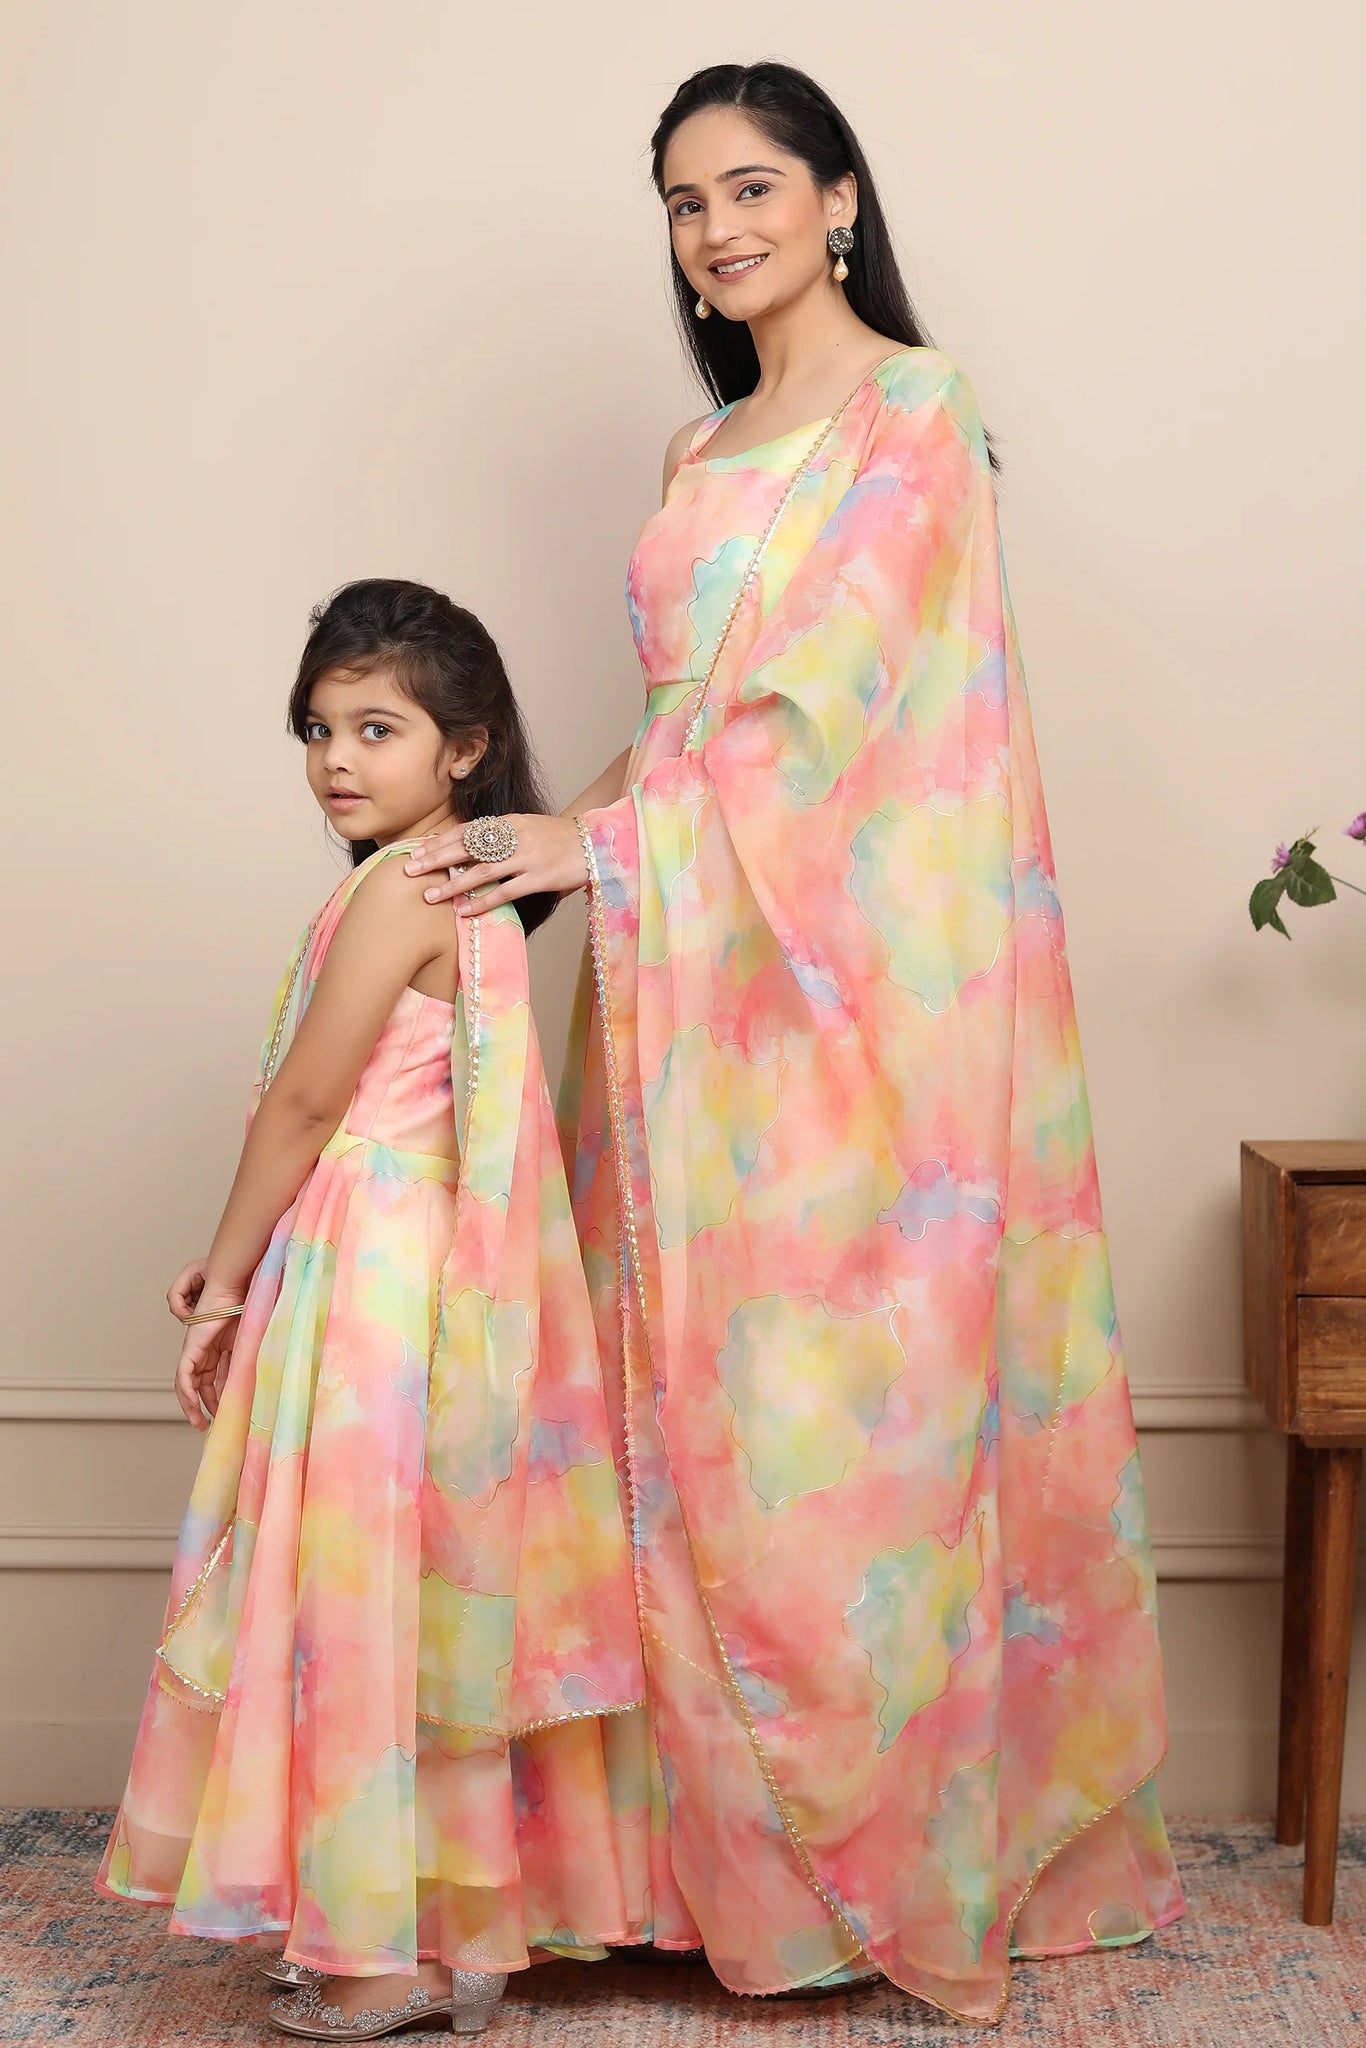 Mom and Daughter Twin Set: Peach Spaghetti Organza Gowns with Multifloral Design